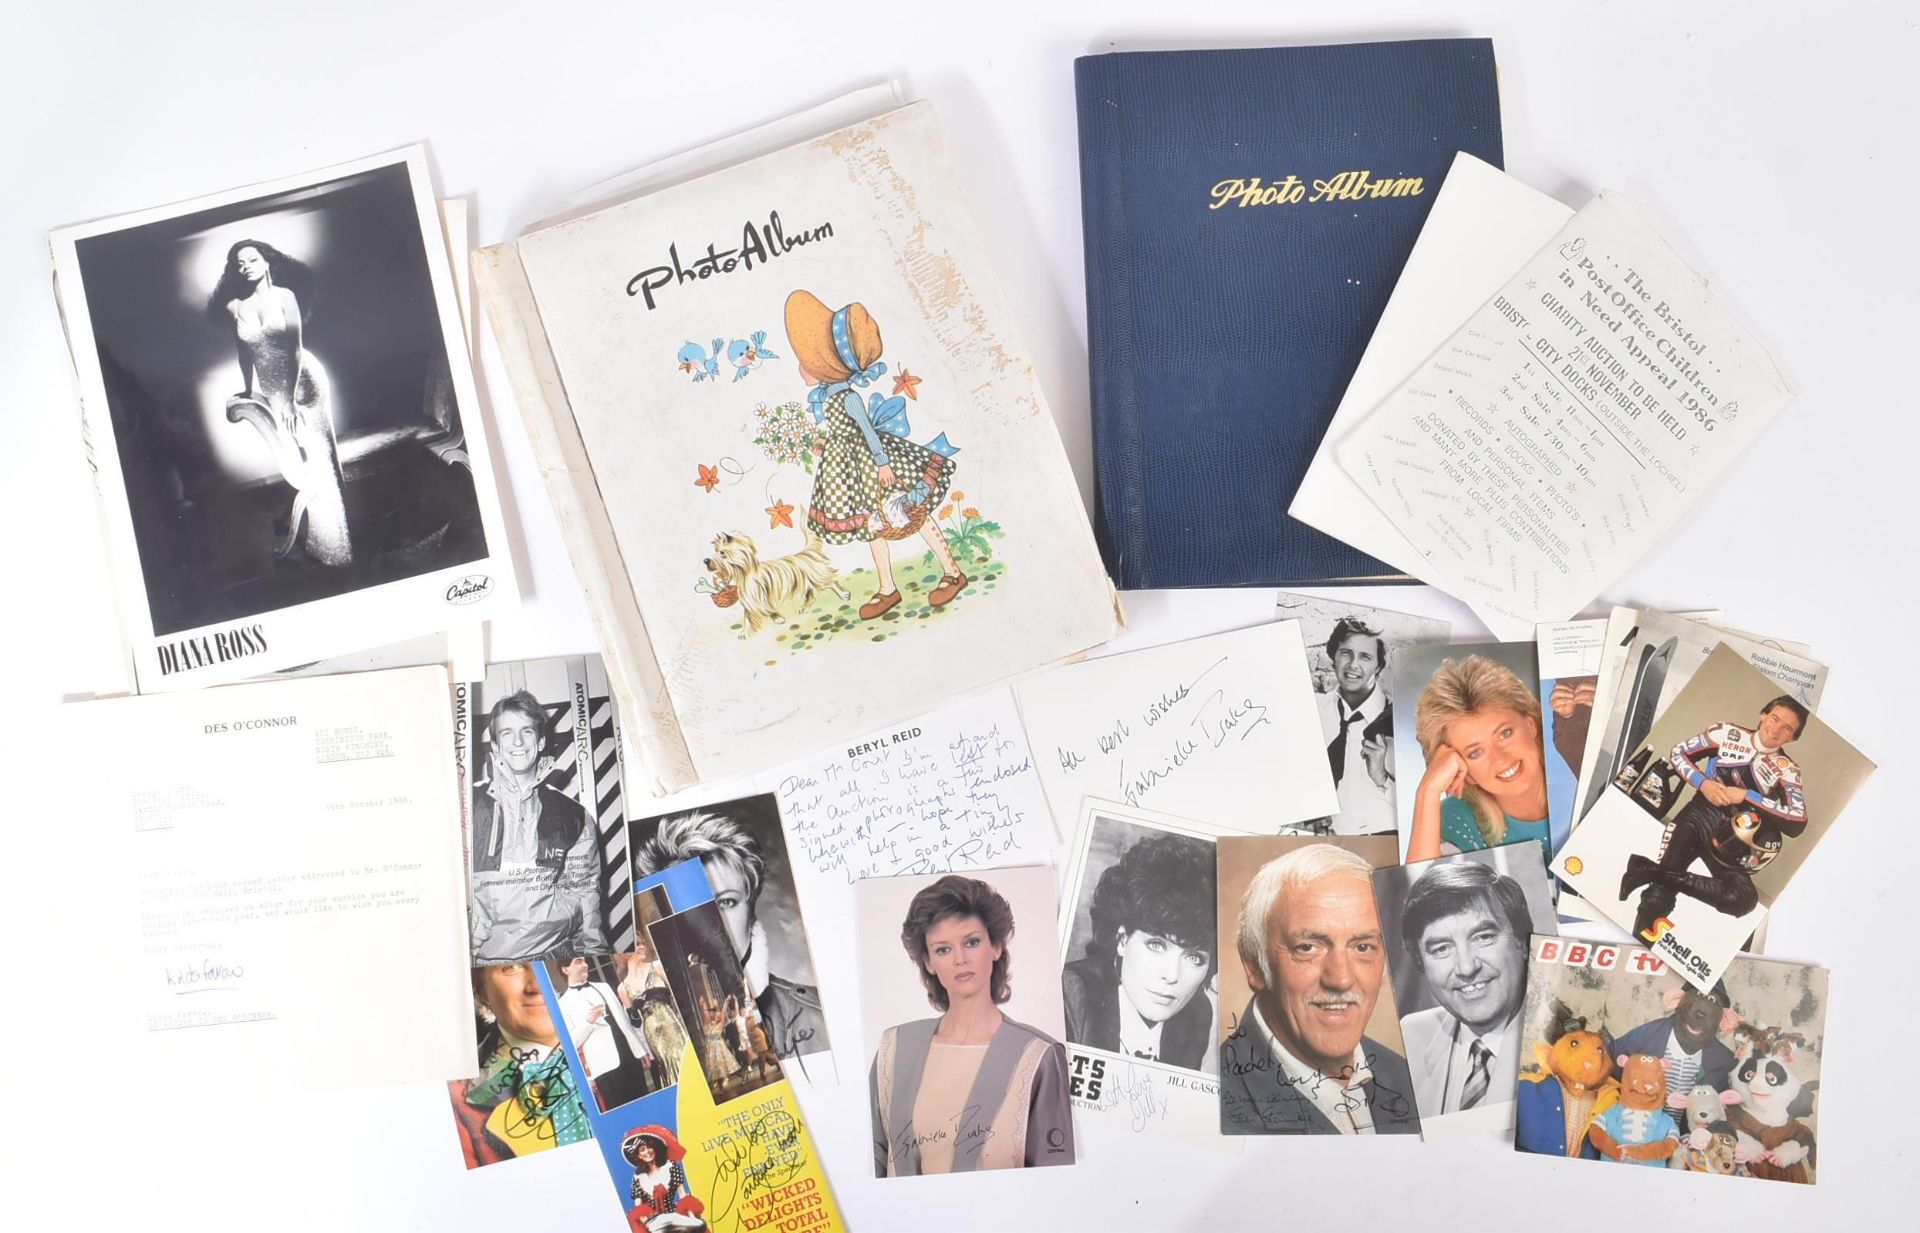 AUTOGRAPHS - LARGE COLLECTION OF 1970S / 1980S